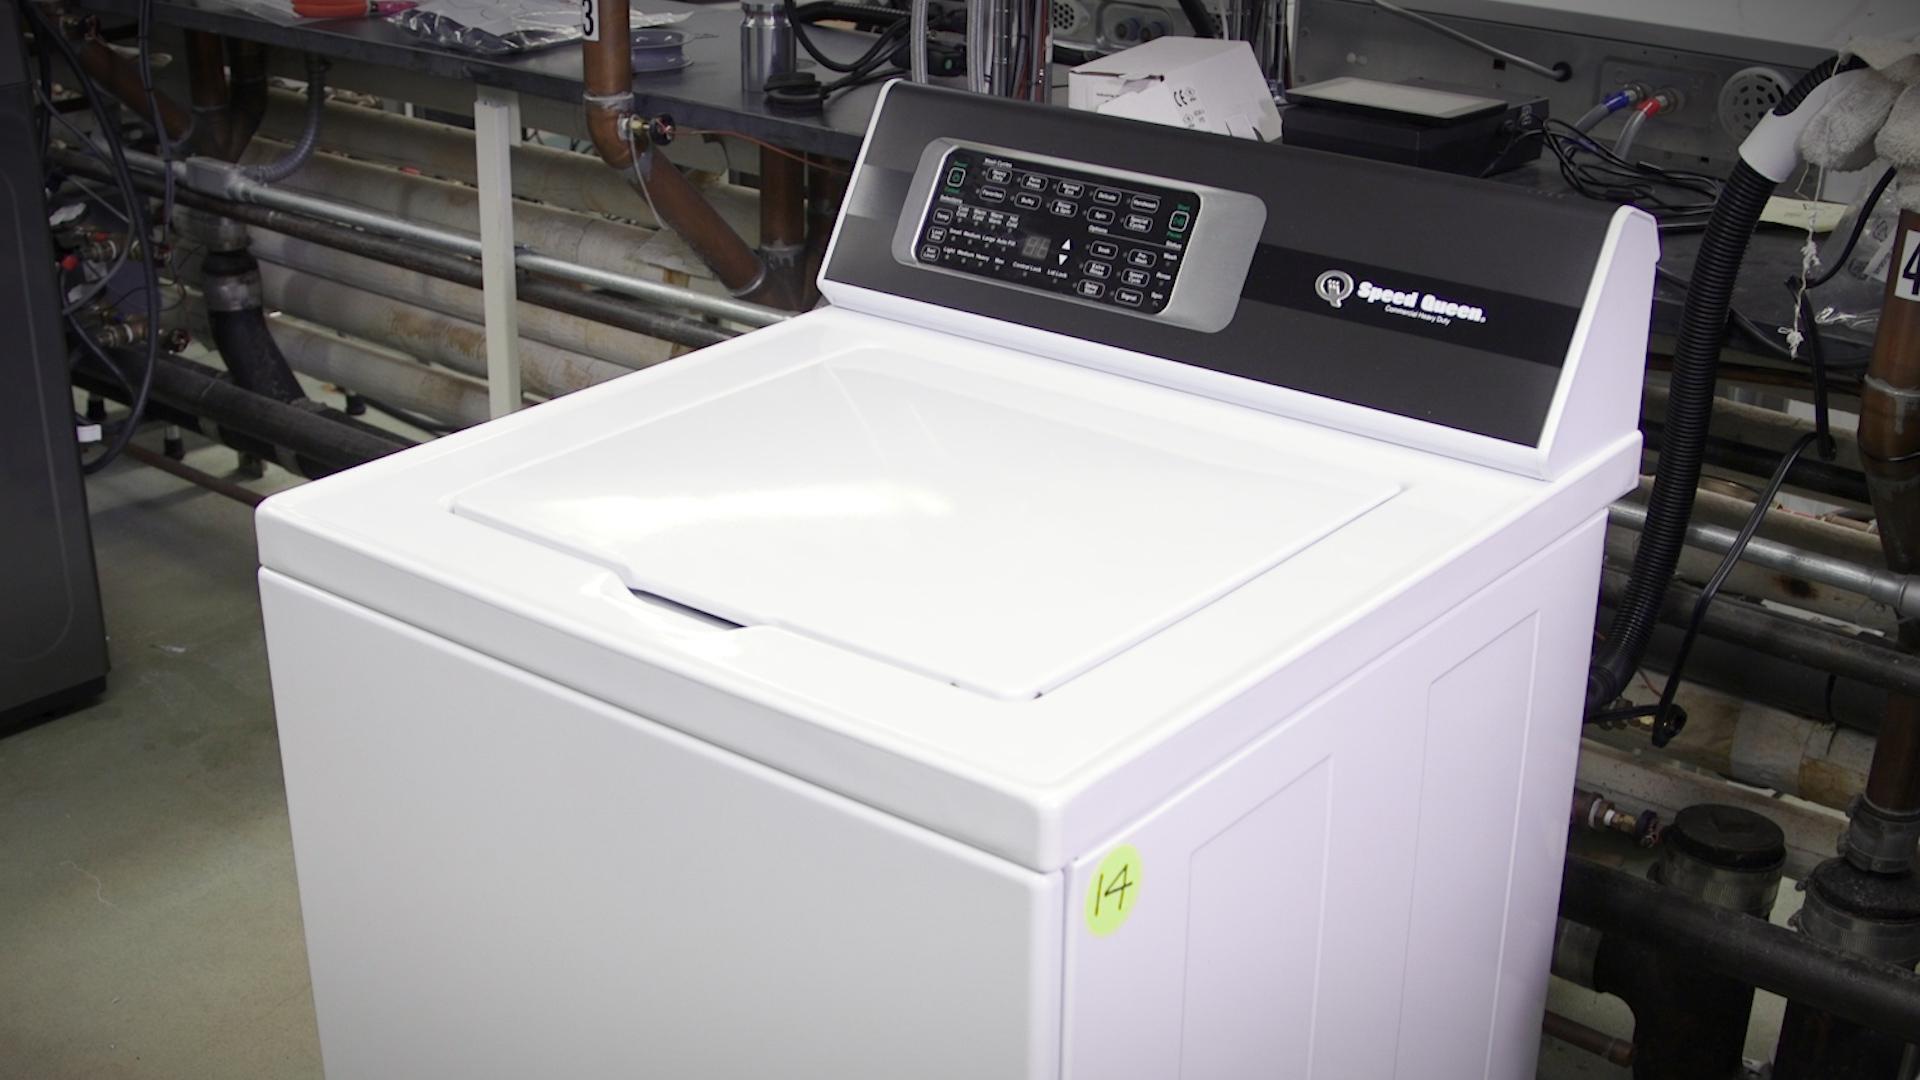 Speed Queen® TR7 3.2 Cu. Ft. Top Load Washer & 7.0 Cu. Ft. Electric Dryer  with 7 Year Warranty TR7003WN / DR7004WE